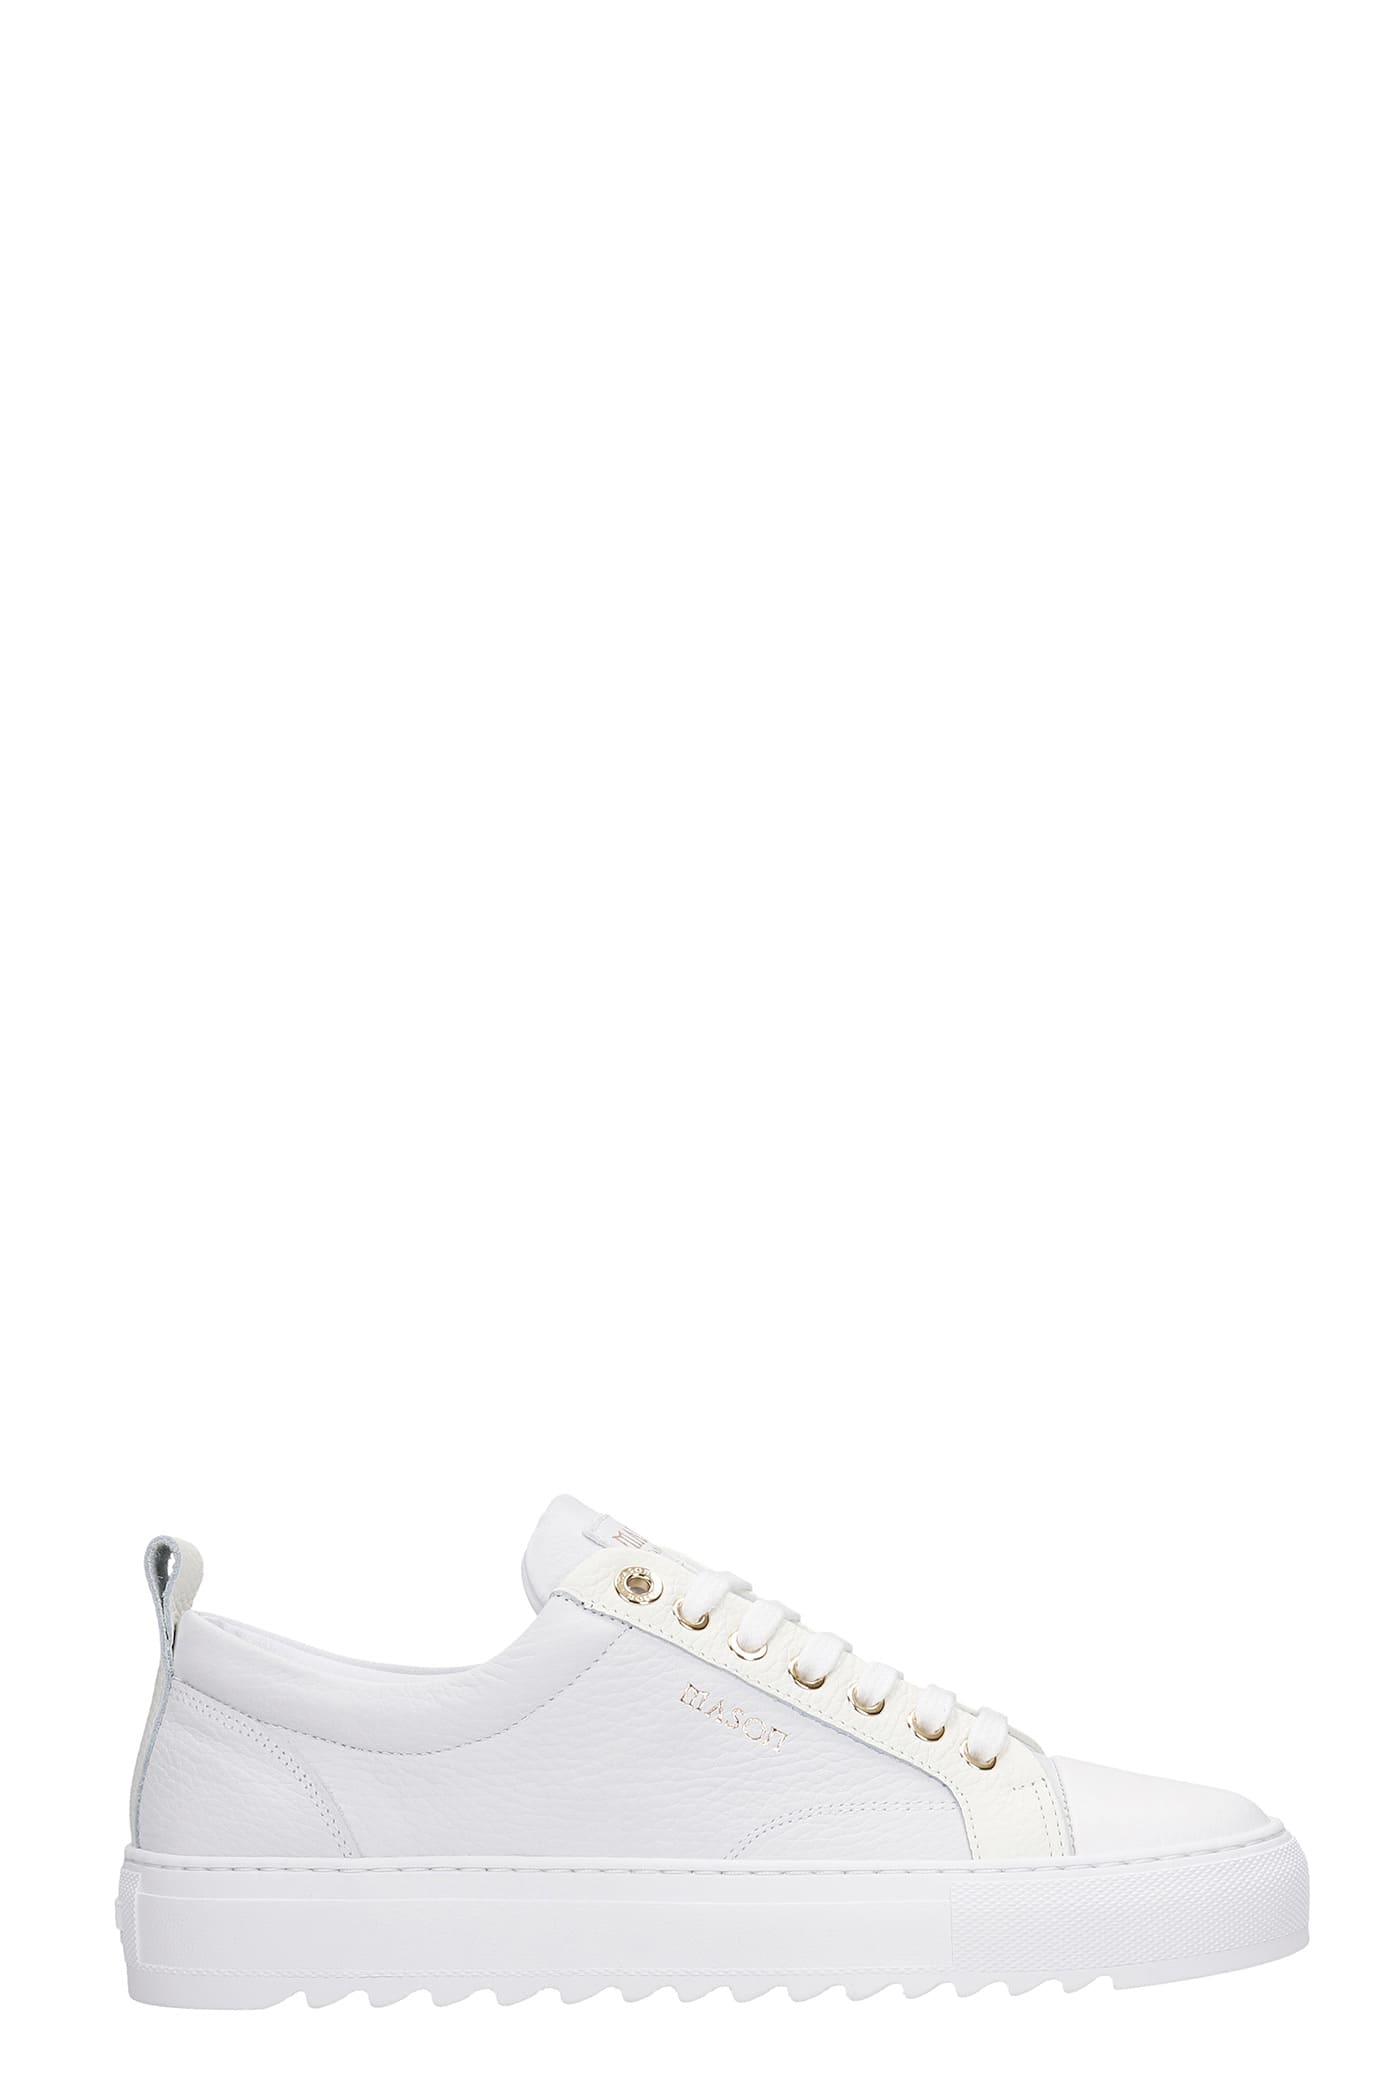 Mason Garments Astro Sneakers In White Leather